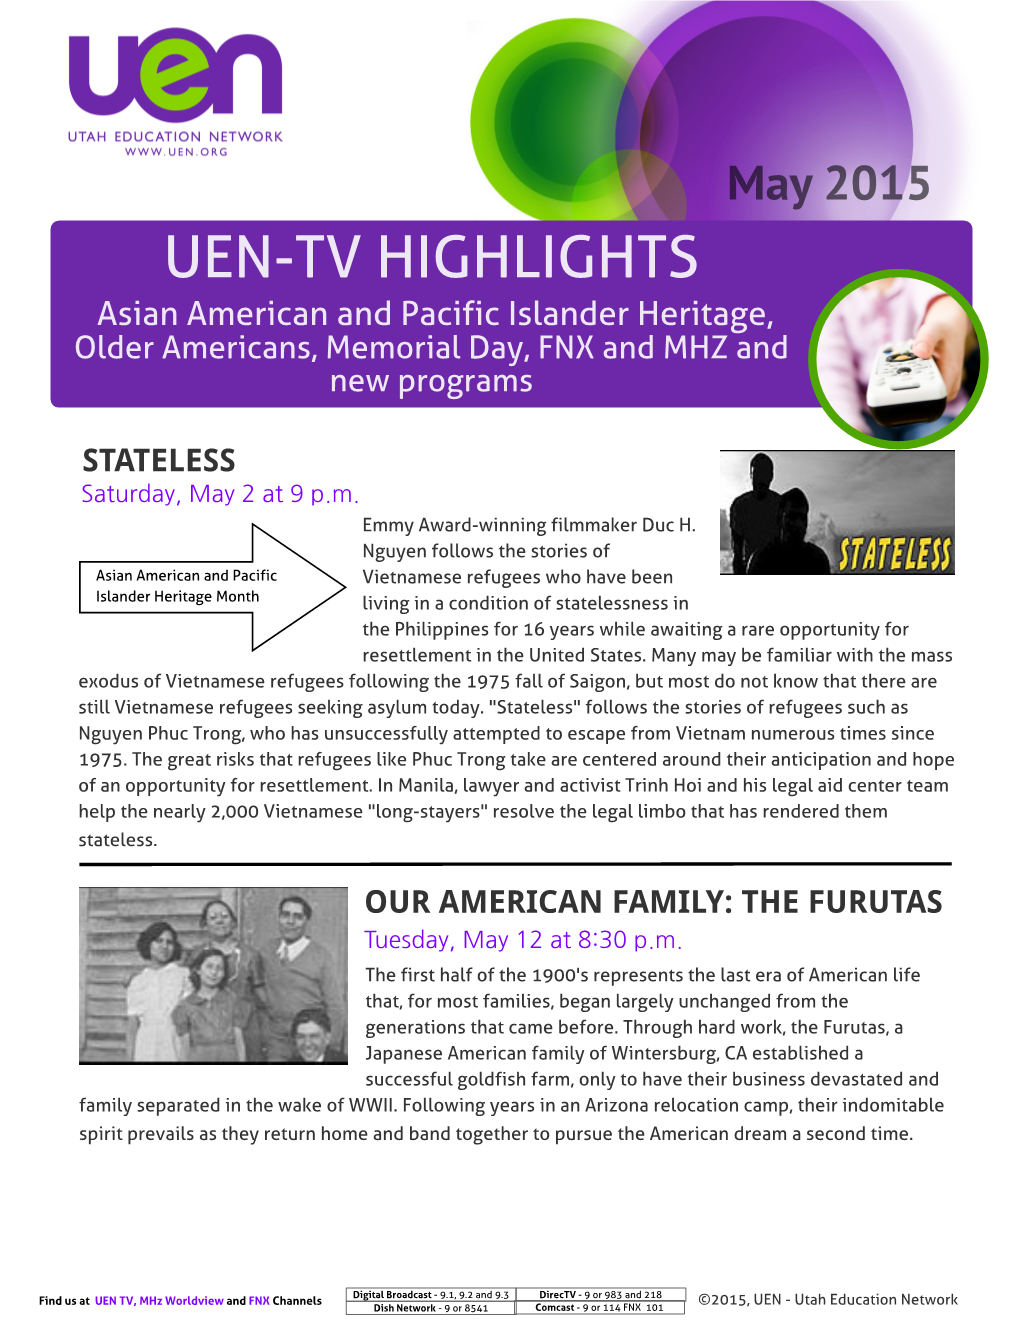 UEN-TV HIGHLIGHTS Asian American and Pacific Islander Heritage, Older Americans, Memorial Day, FNX and MHZ and New Programs